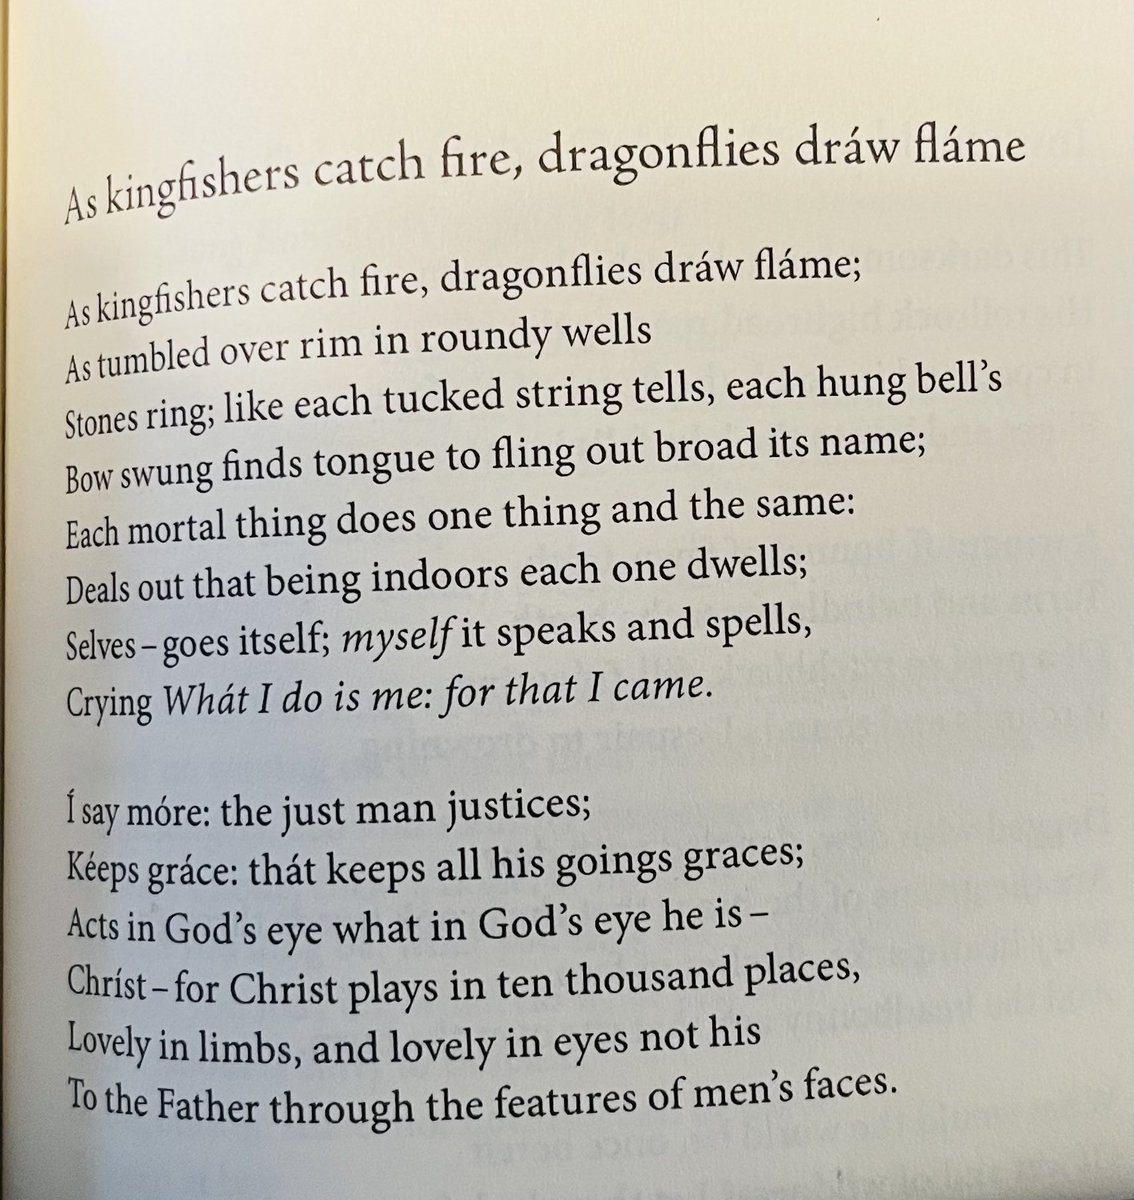 GERARD MANLEY HOPKINS I heard about this poem in grad school from a medievalist. His enthusiasm was noted, the poem was not. Today I agree: it is an astonishing work. The theme of selfhood seems brilliantly demonstrated, the role of Christ as universal concrete other ponderable.